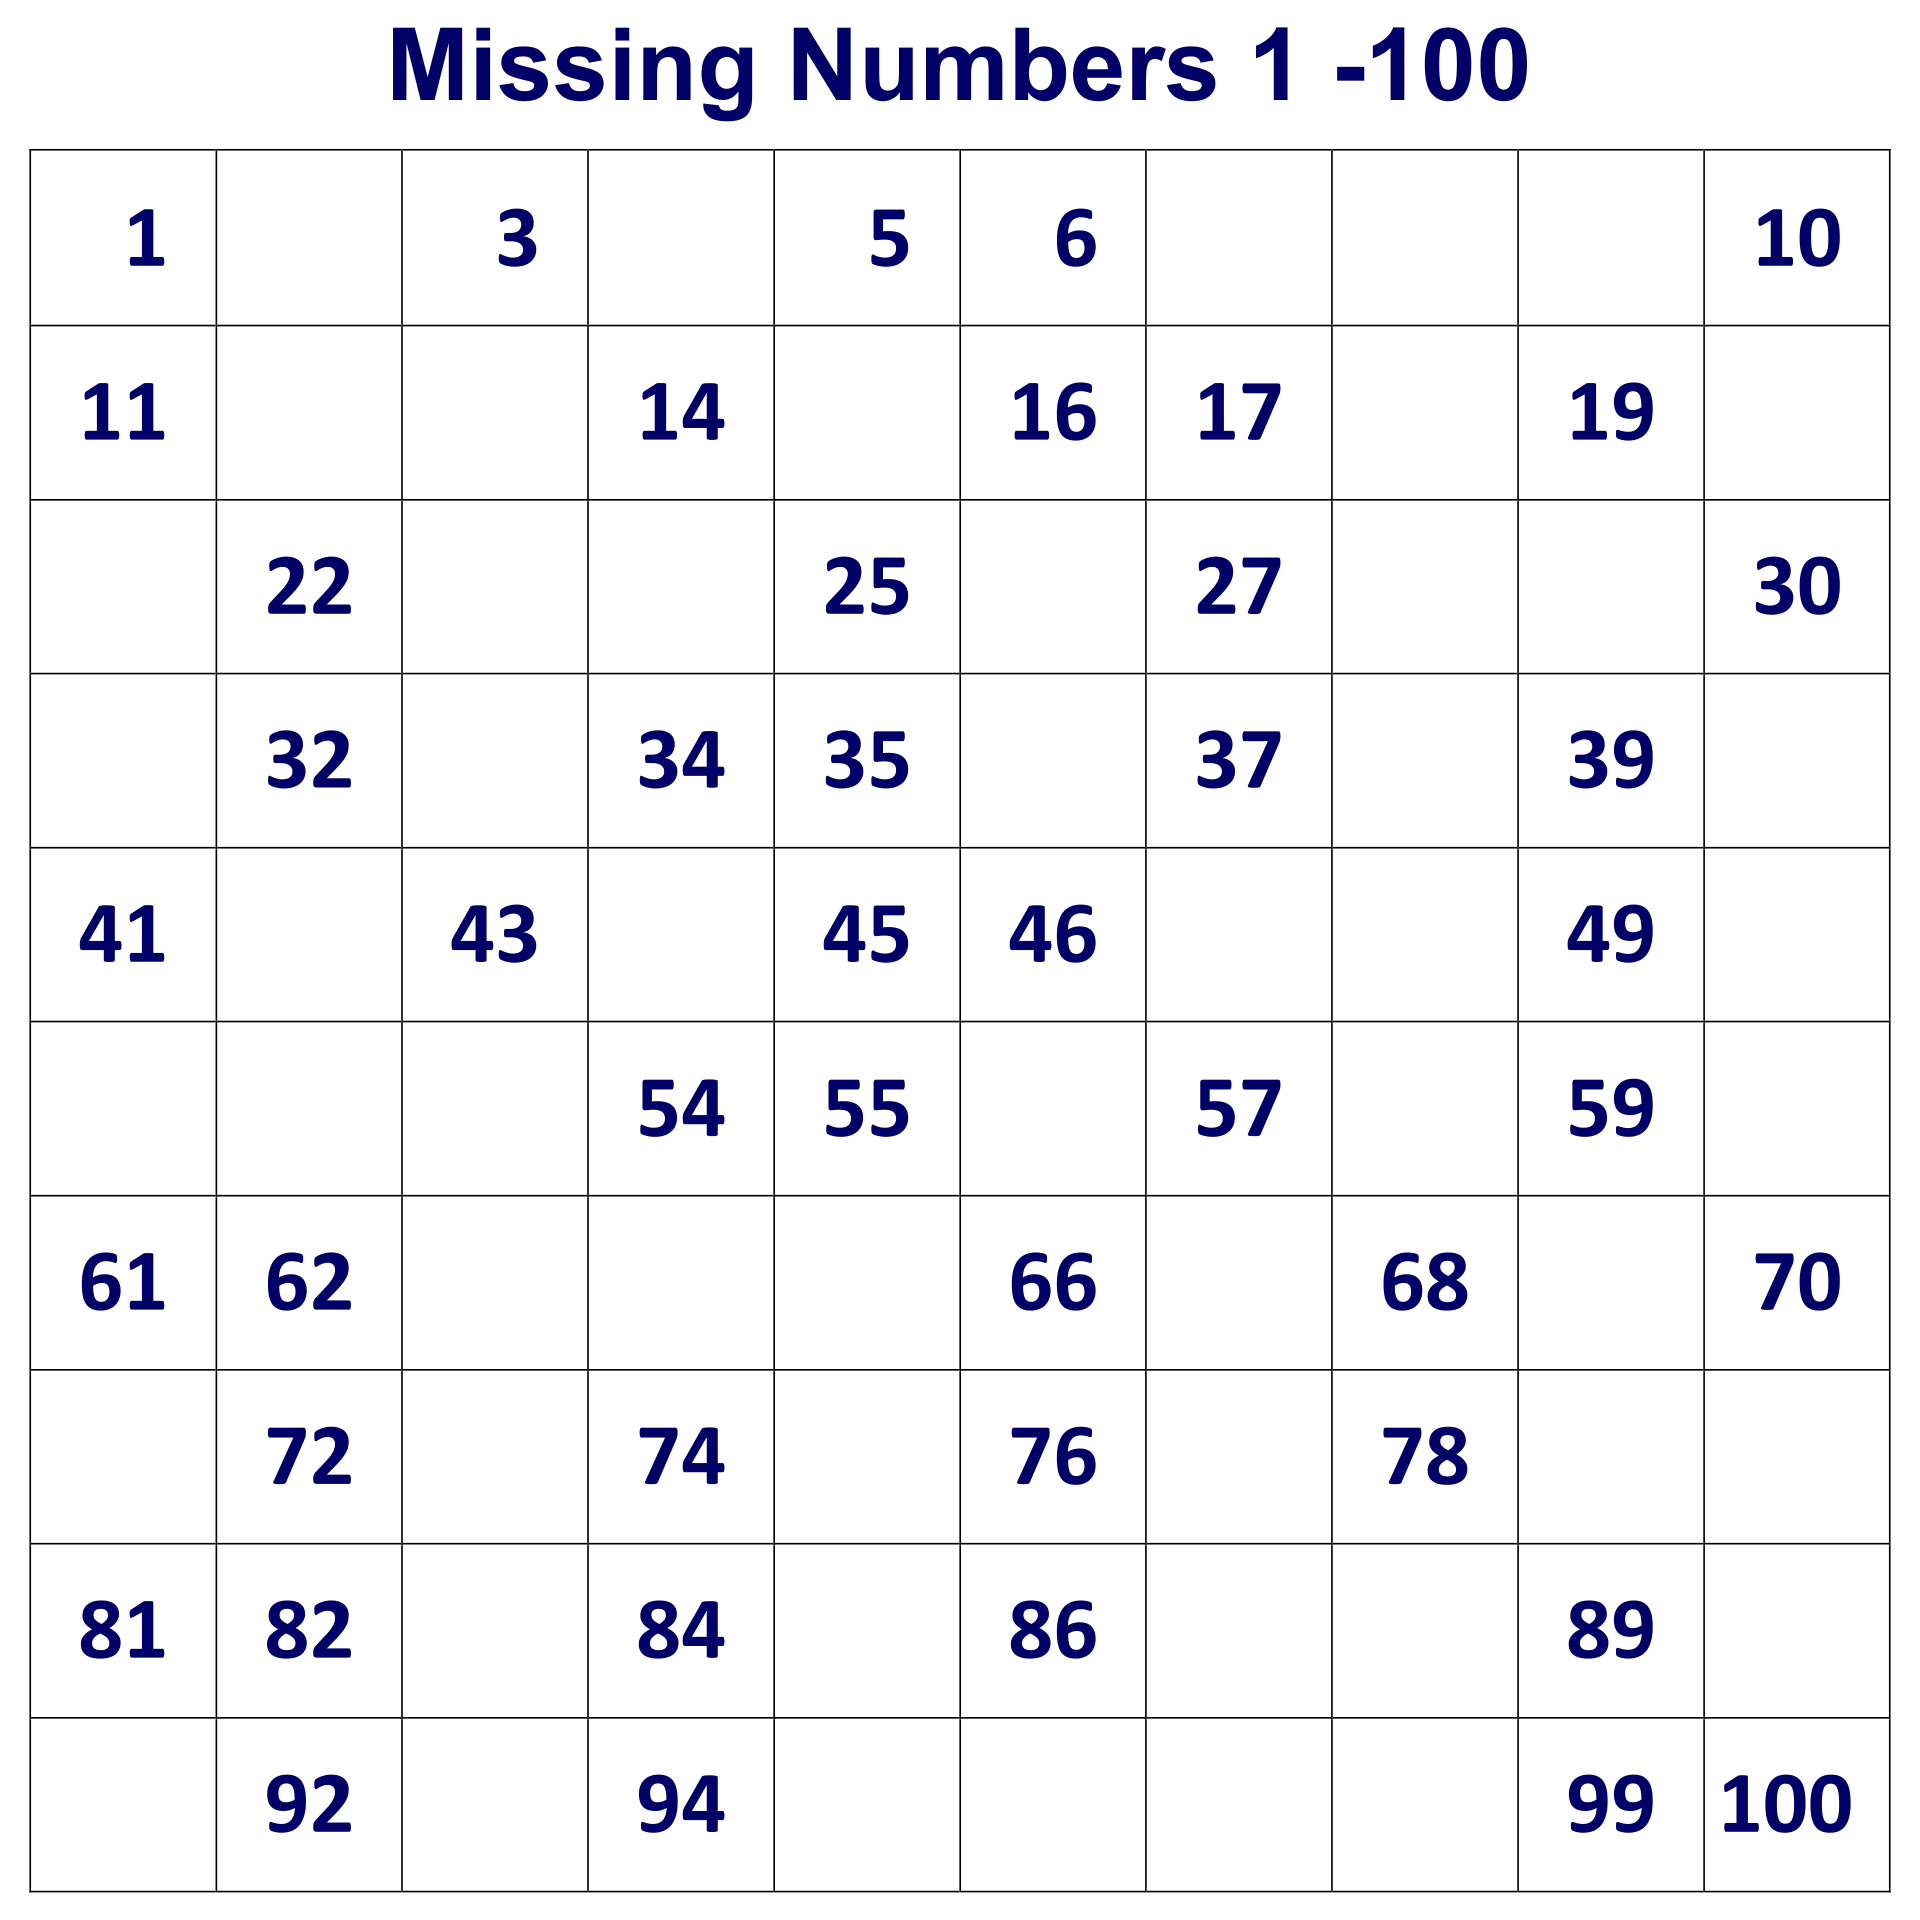 Hundreds Chart Missing Numbers